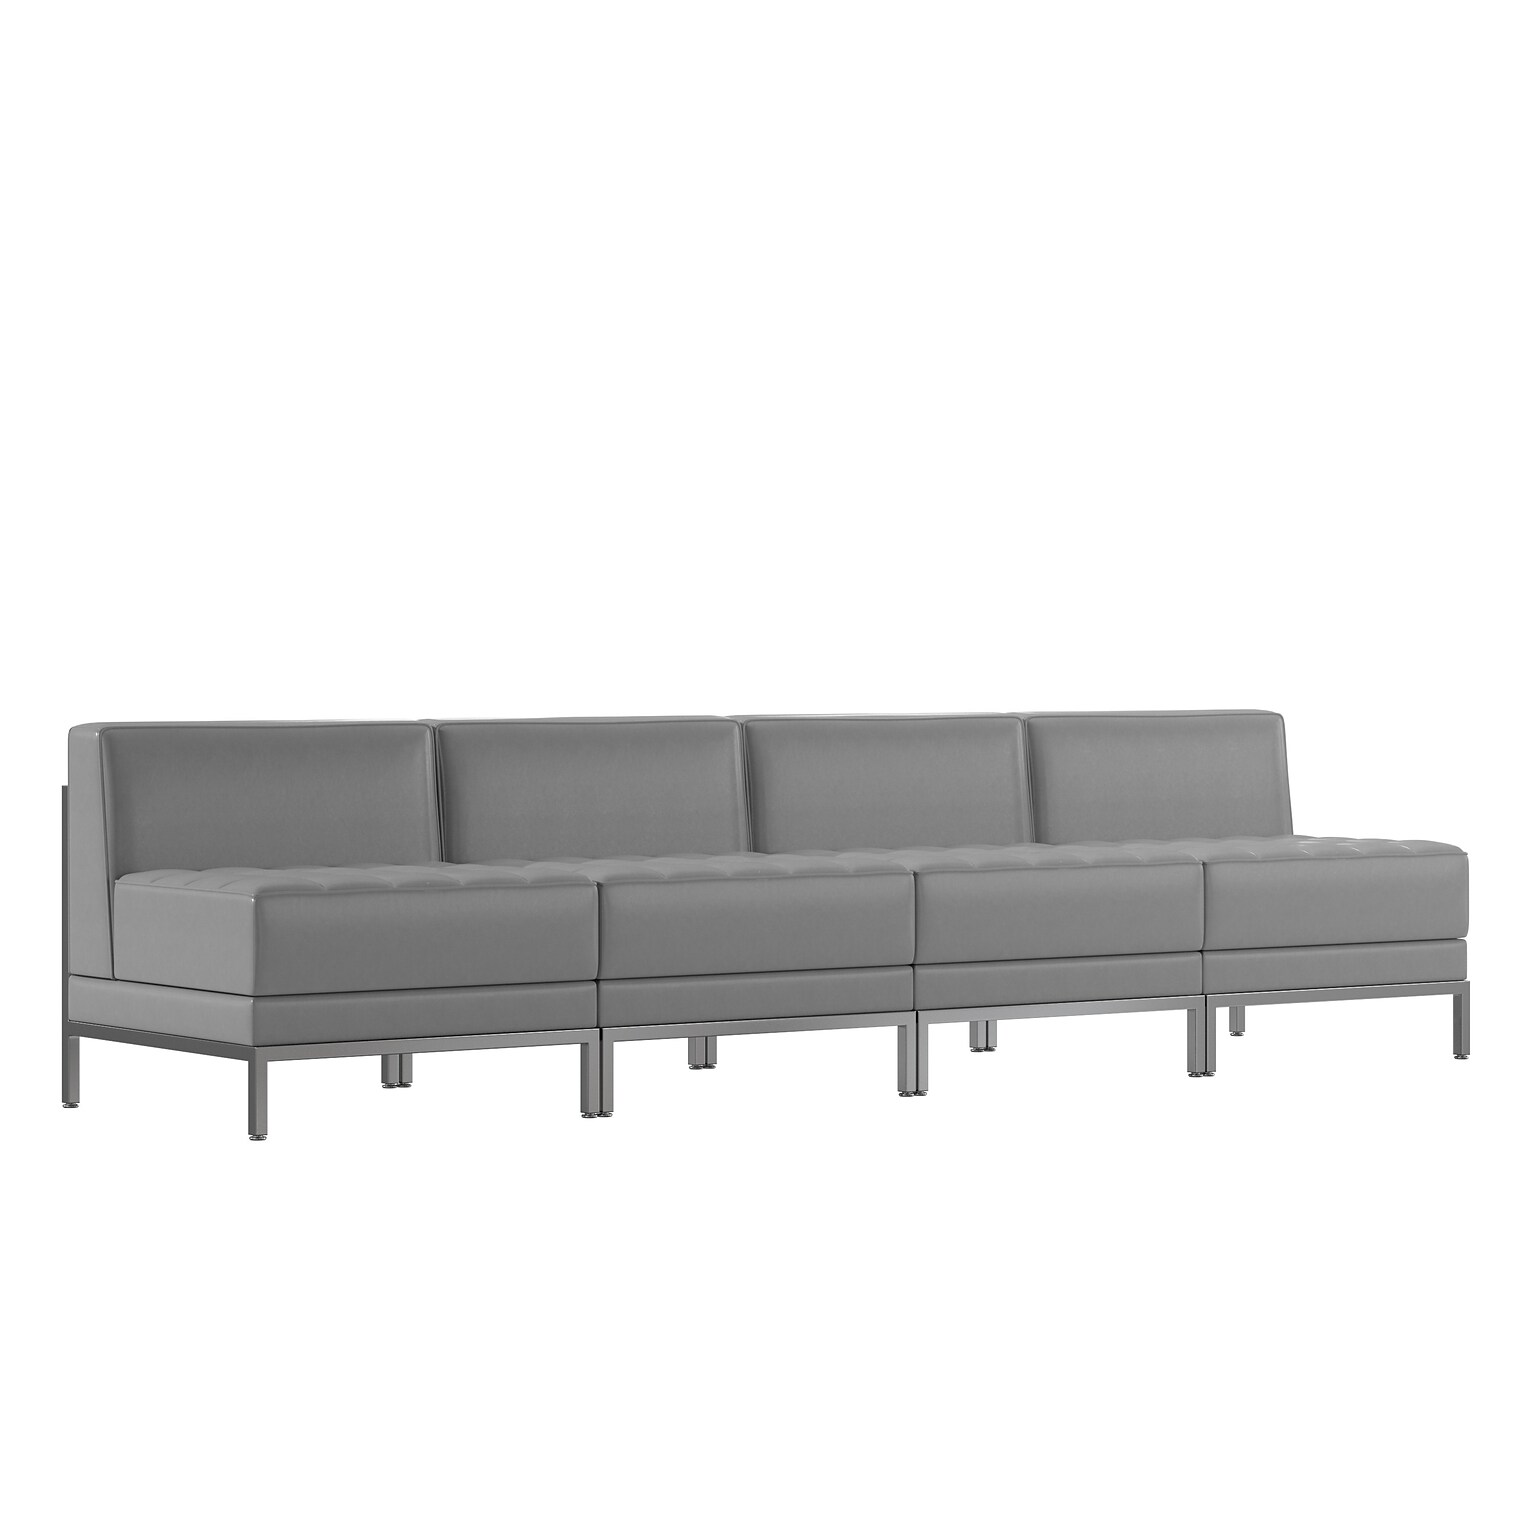 Flash Furniture HERCULES Imagination Series LeatherSoft Waiting Room Reception Set, Gray, 4-Piece (ZBIMAGMIDCH4GY)